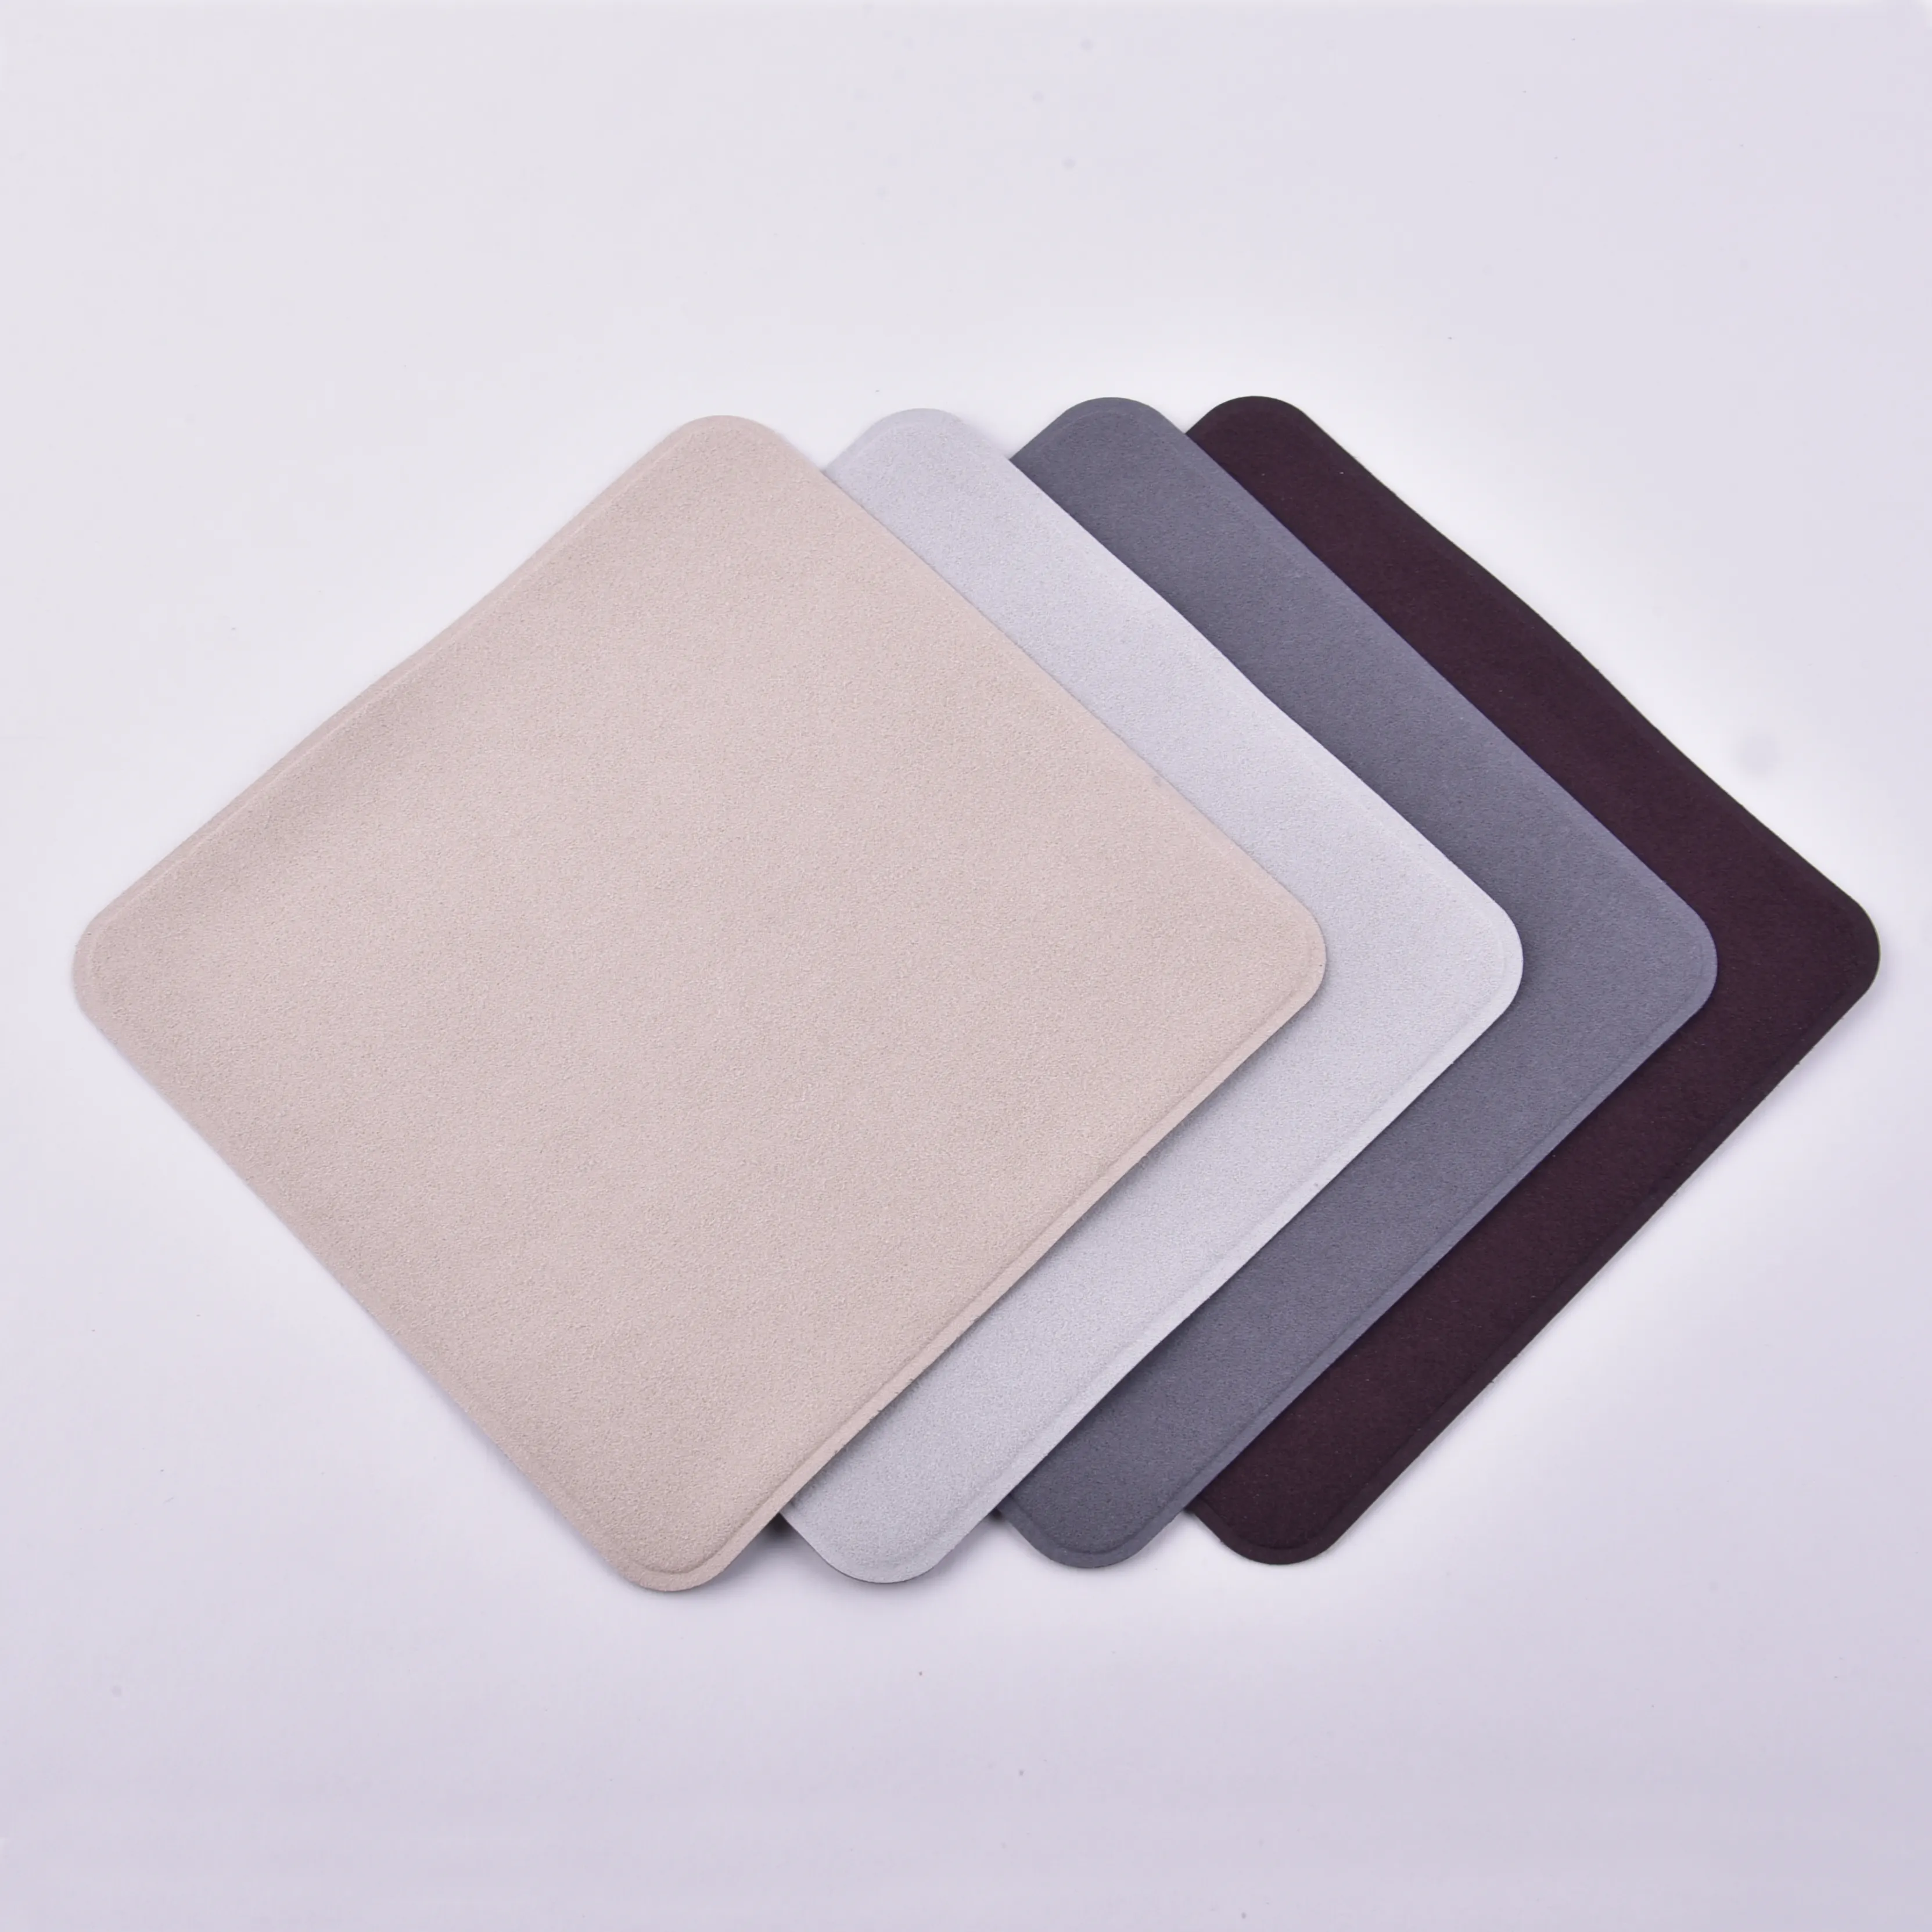 JAYQI New Microfiber Polishing Cloth For Apple iPhone 13 Screen Cleaning Cloth For MacBook Air Pro Mac Mini Pro Display Cleaner